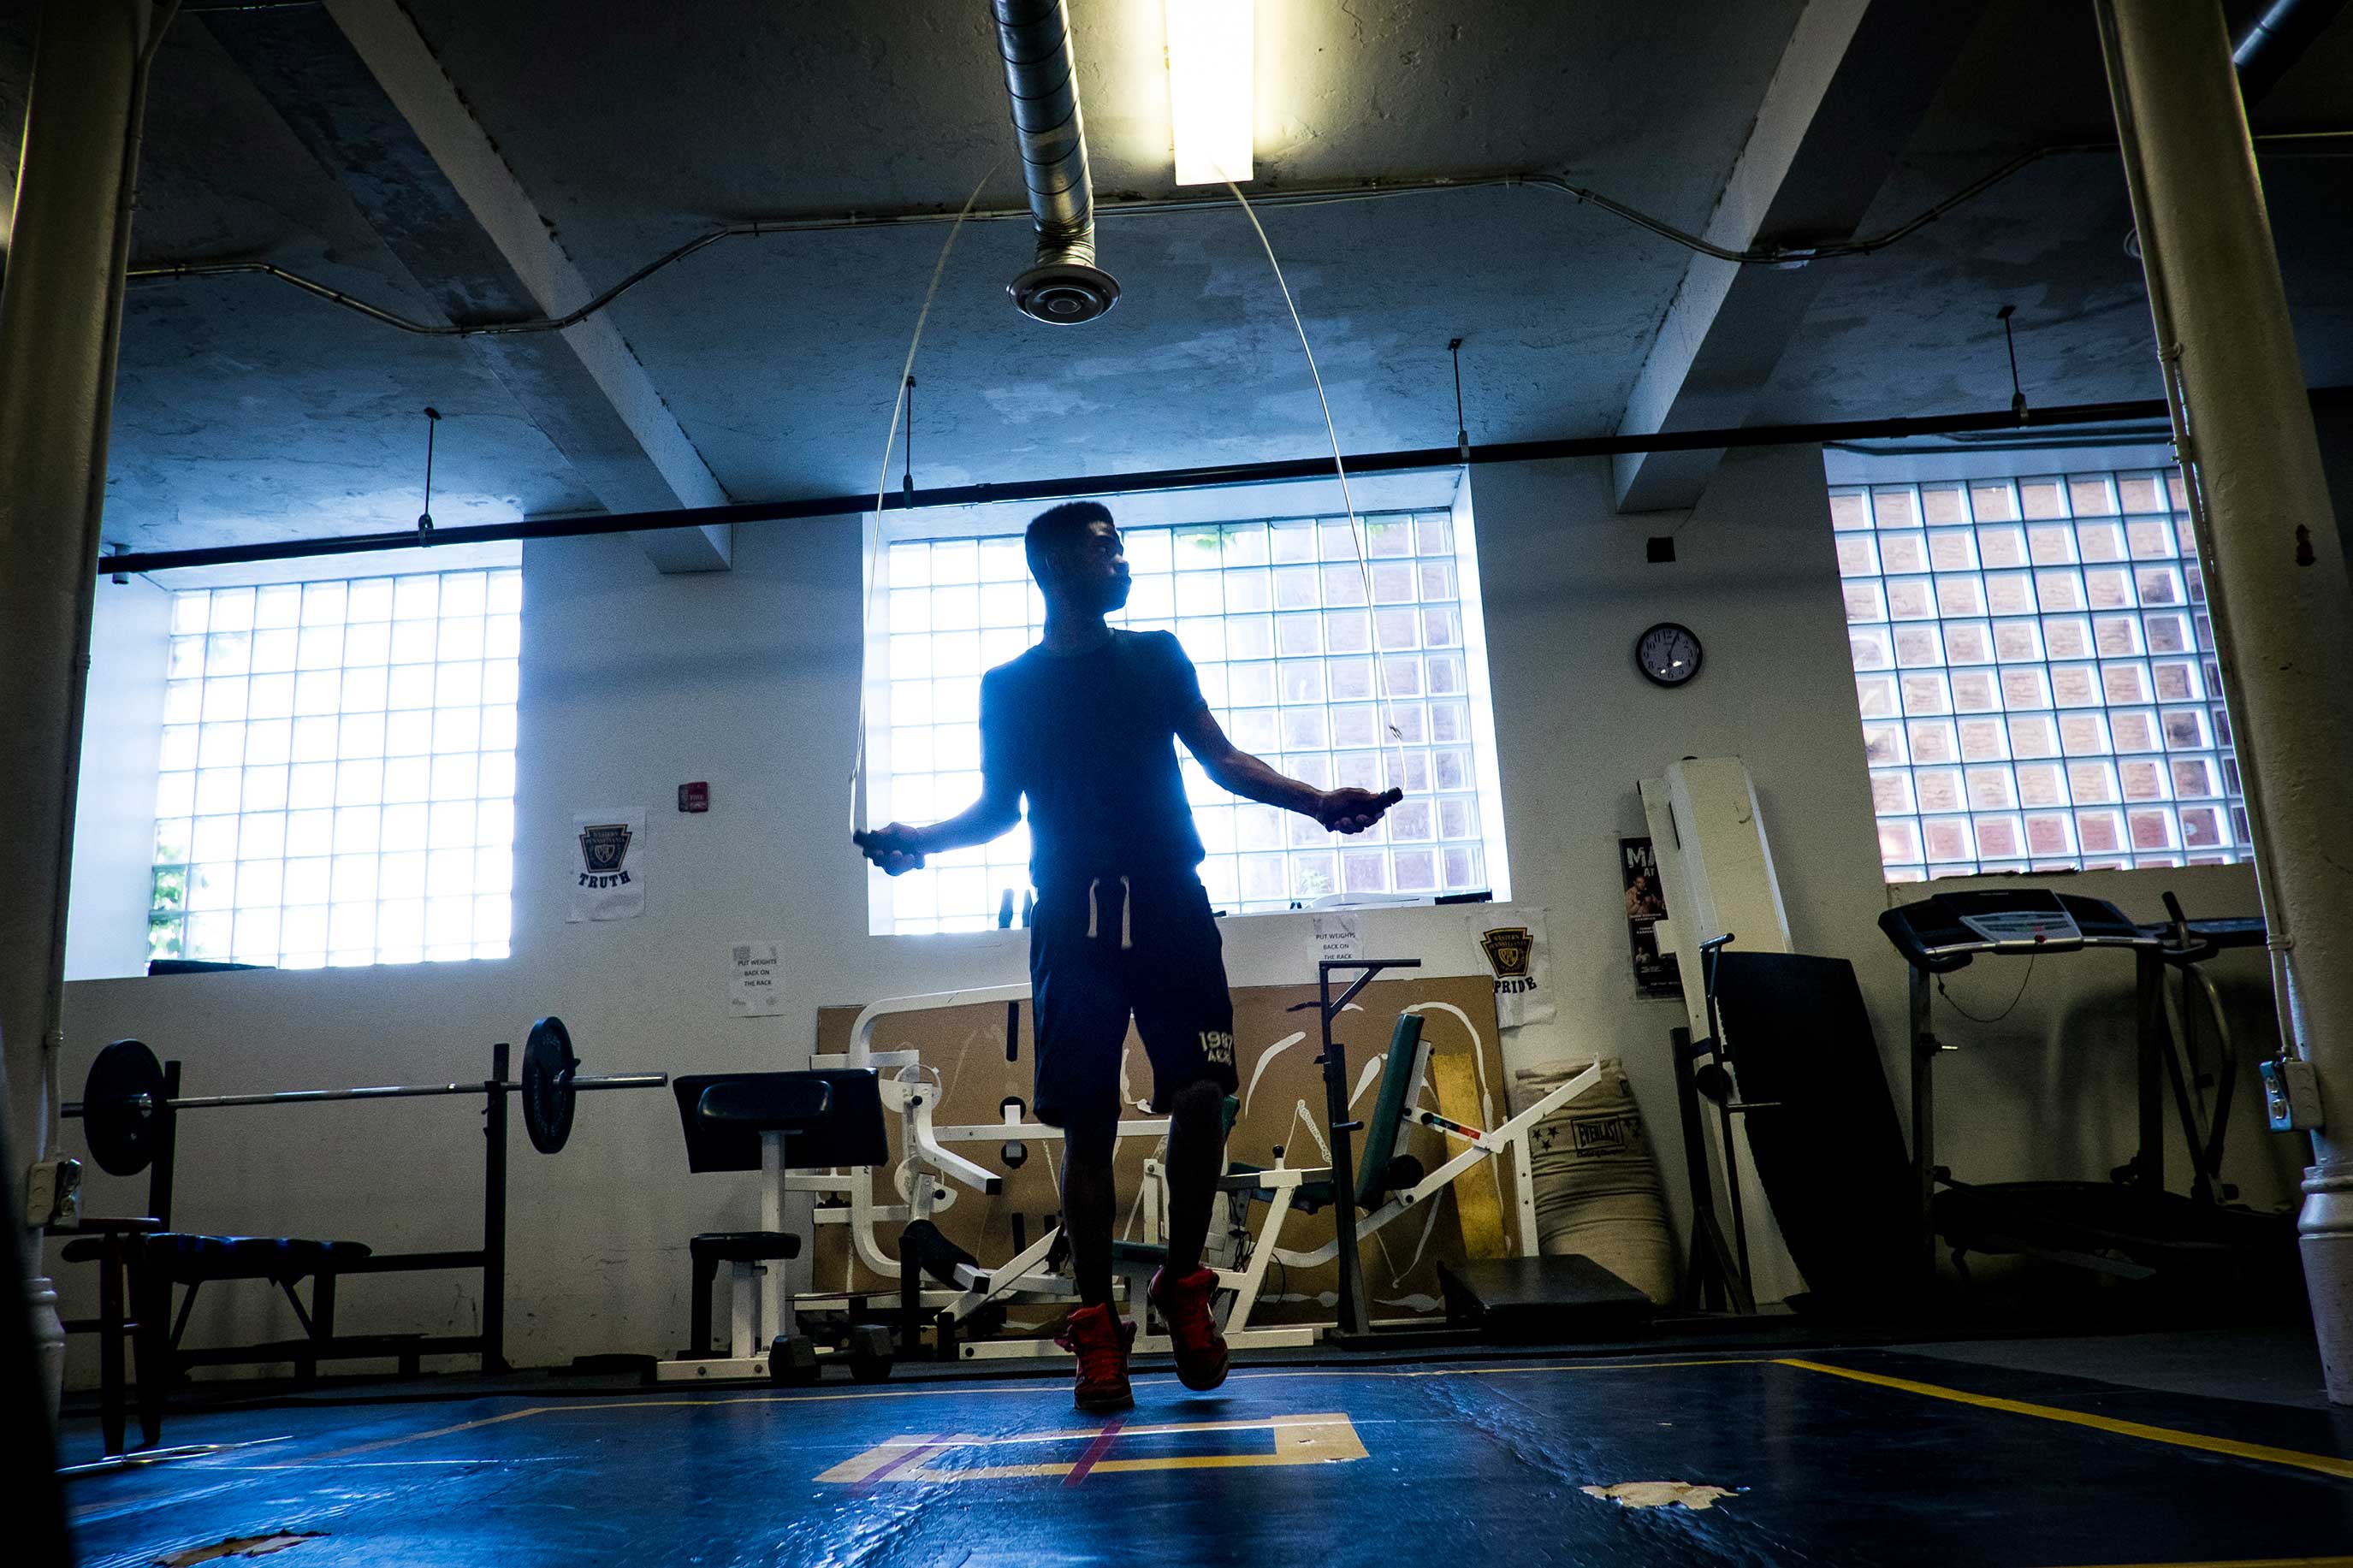 A young man jumps rope in the Western Pennsylvania branch of the Police Athletic League, which runs a boxing program in the basement of the Braddock Community Center.